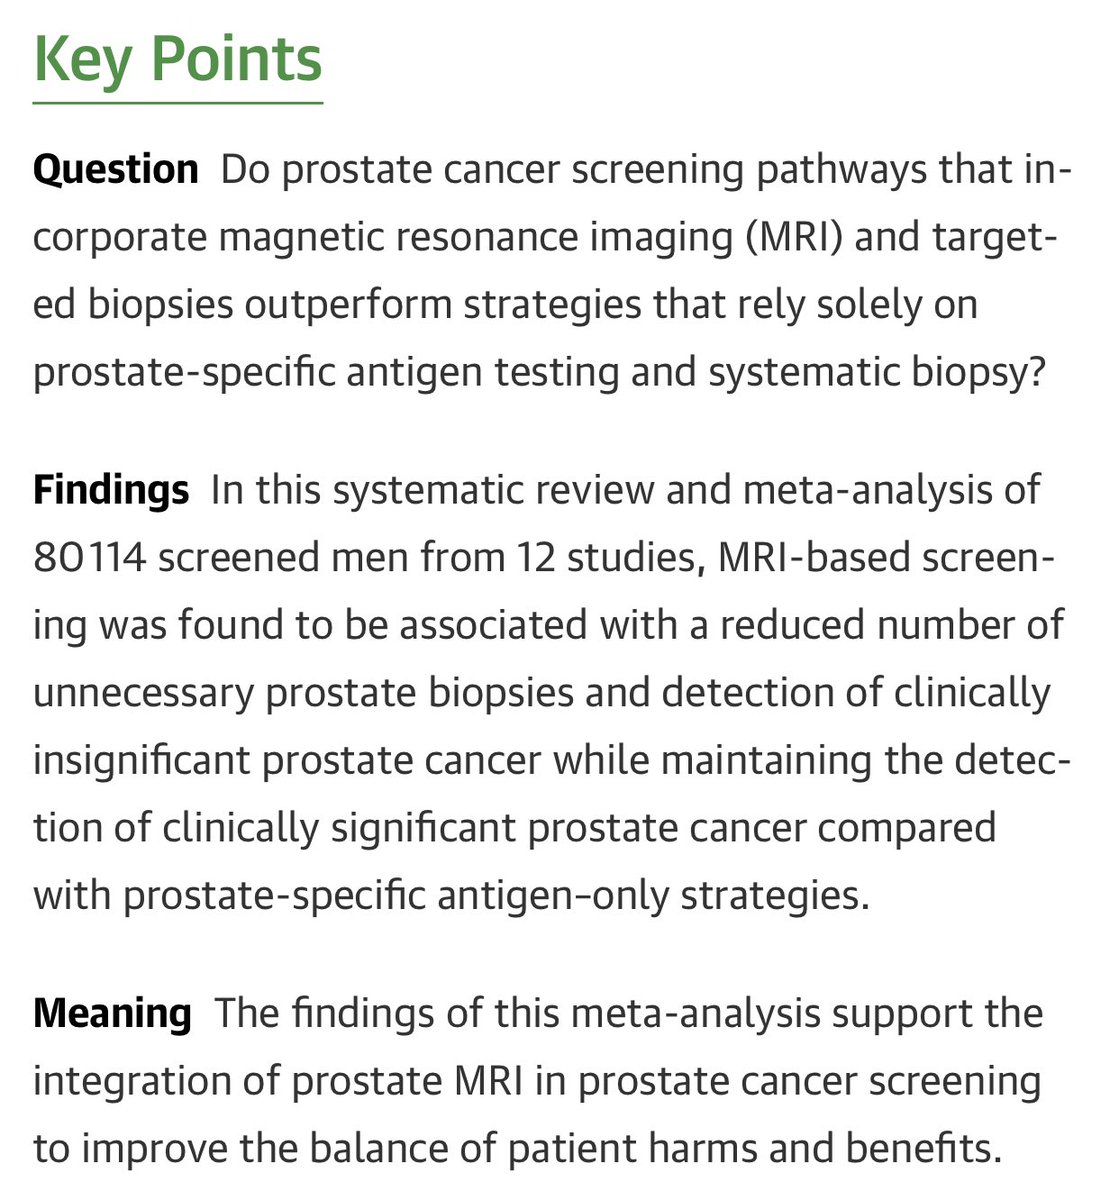 Integrating MRI in PCa screening pathways is associated with a reduced number of unnecessary biopsies and overdiagnosis of insignificant PCa while maintaining csPCa detection as compared with PSA-only screening. @JAMAOnc #Oncology #MedEd #ProstateCancer #MRI #Cancerscreening